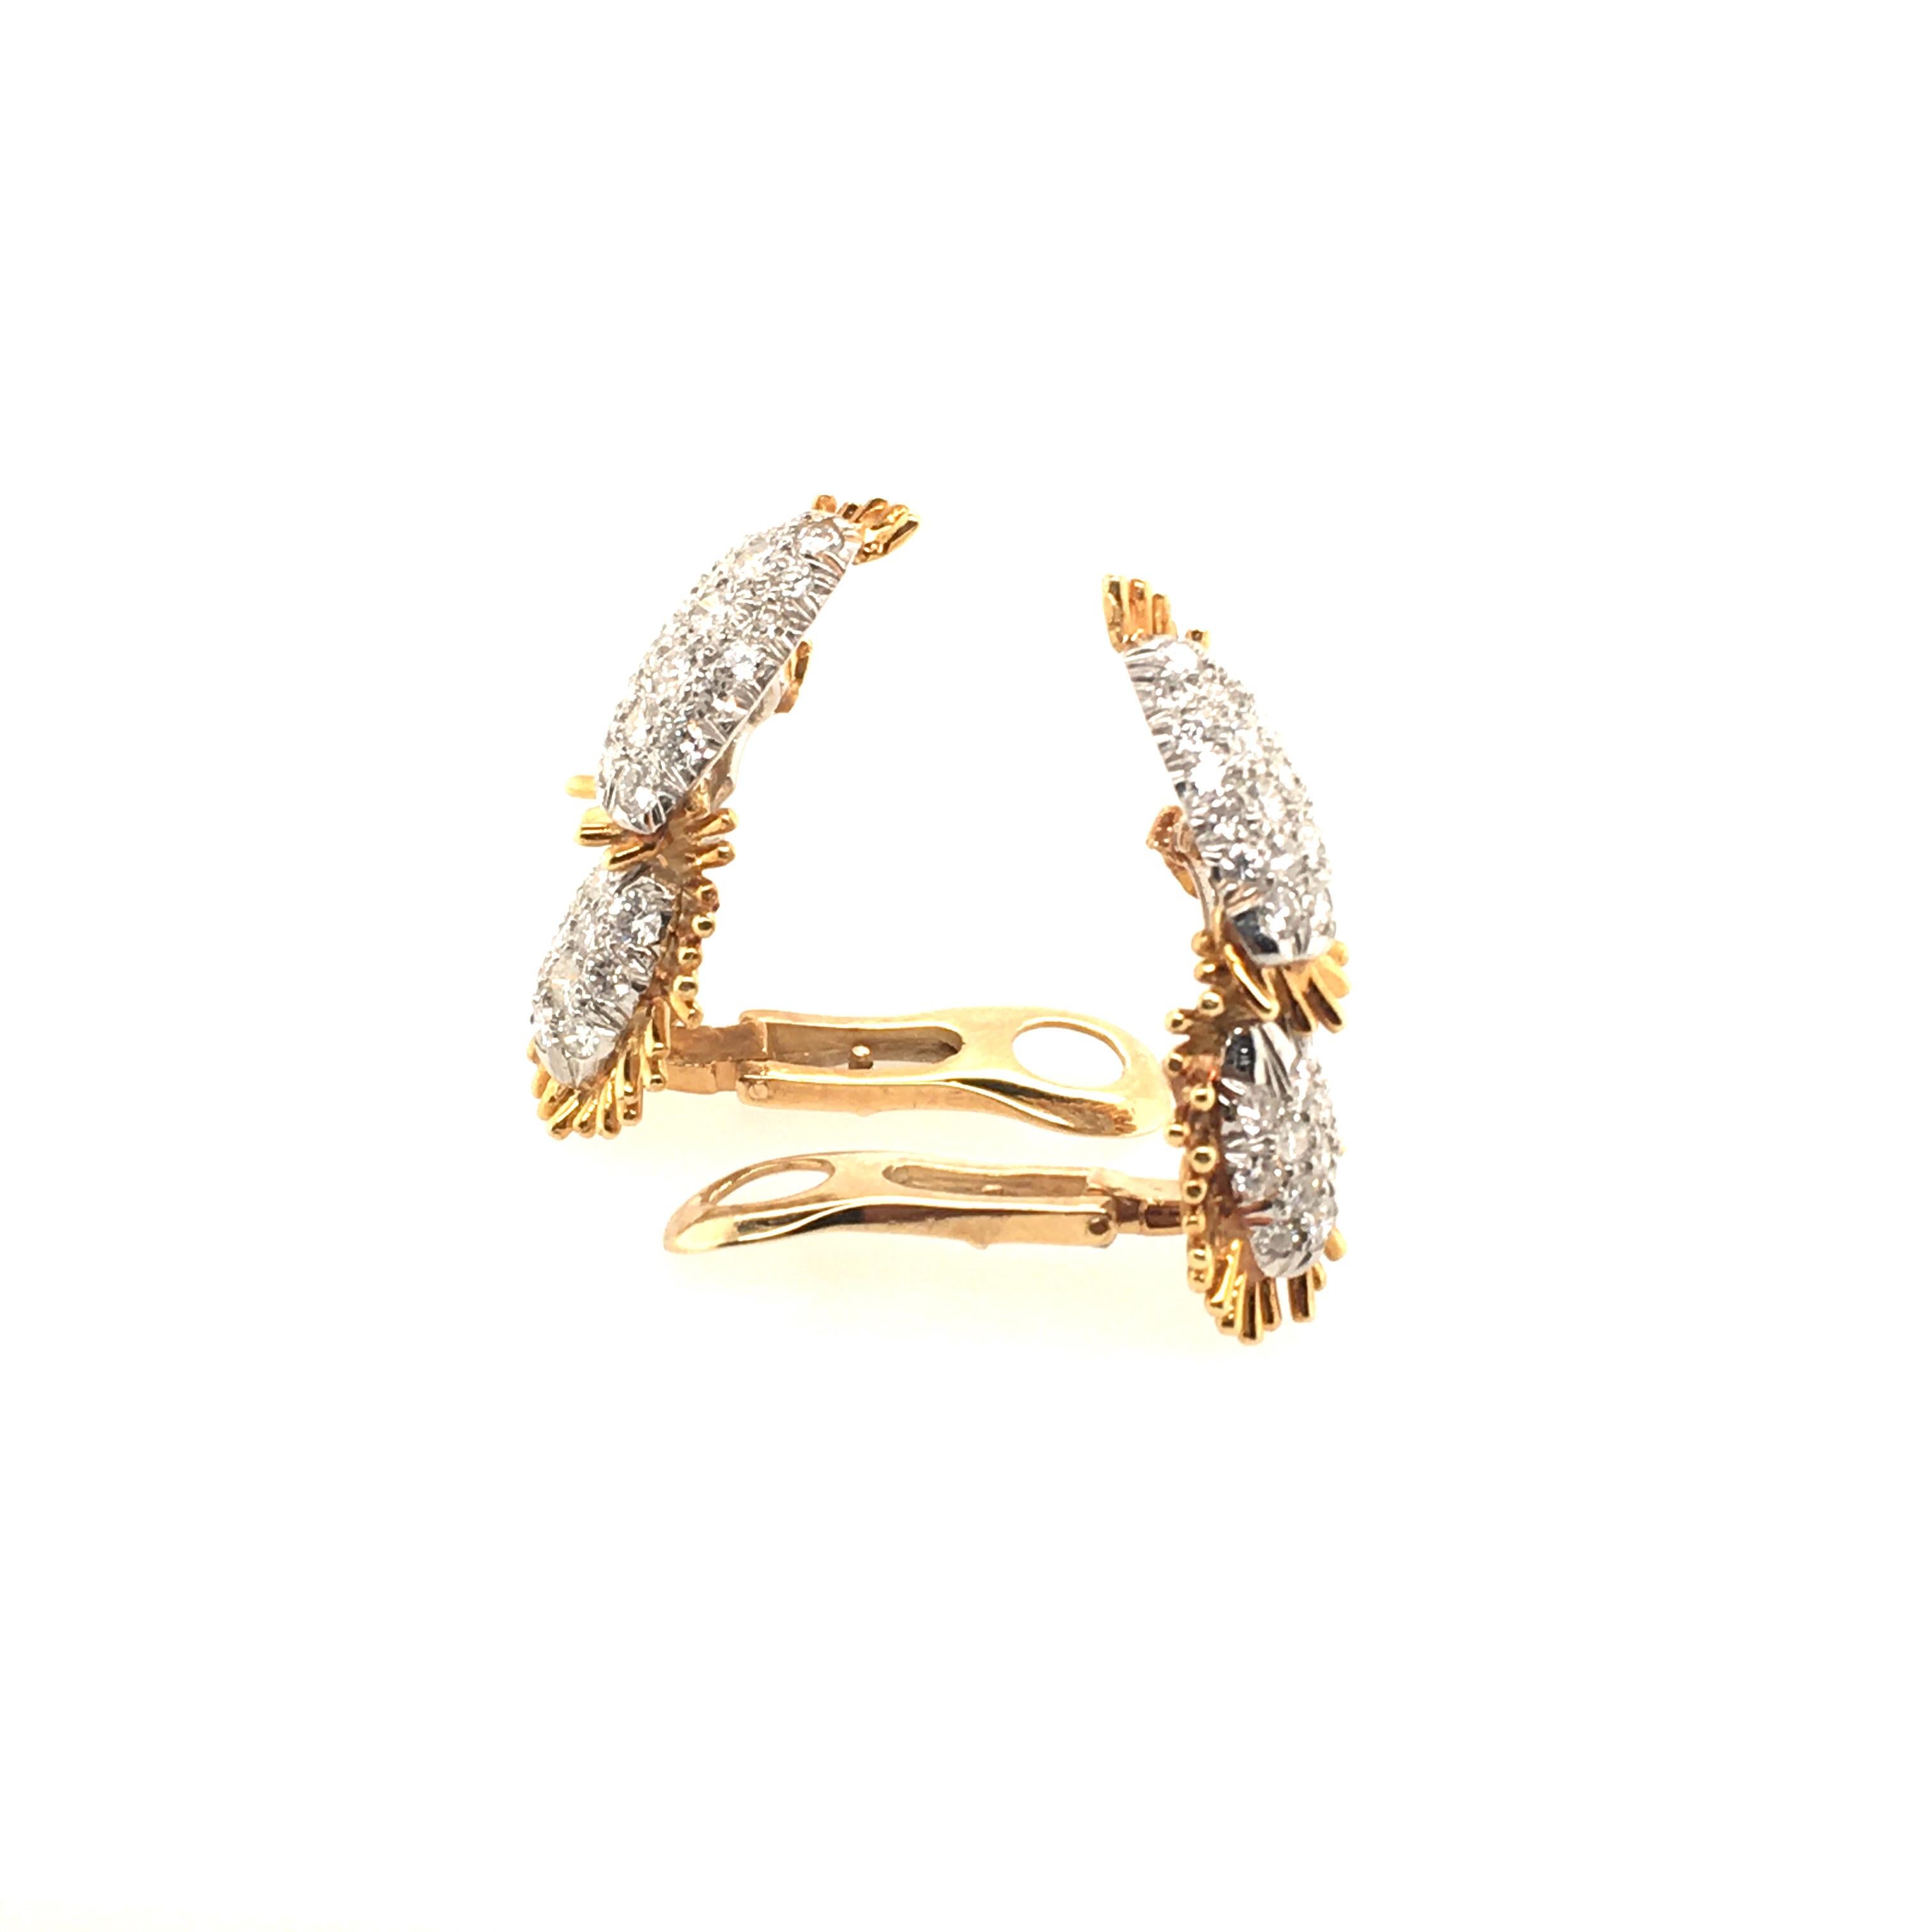 Contemporary Pair of Yellow Gold, Platinum and Diamond Earrings